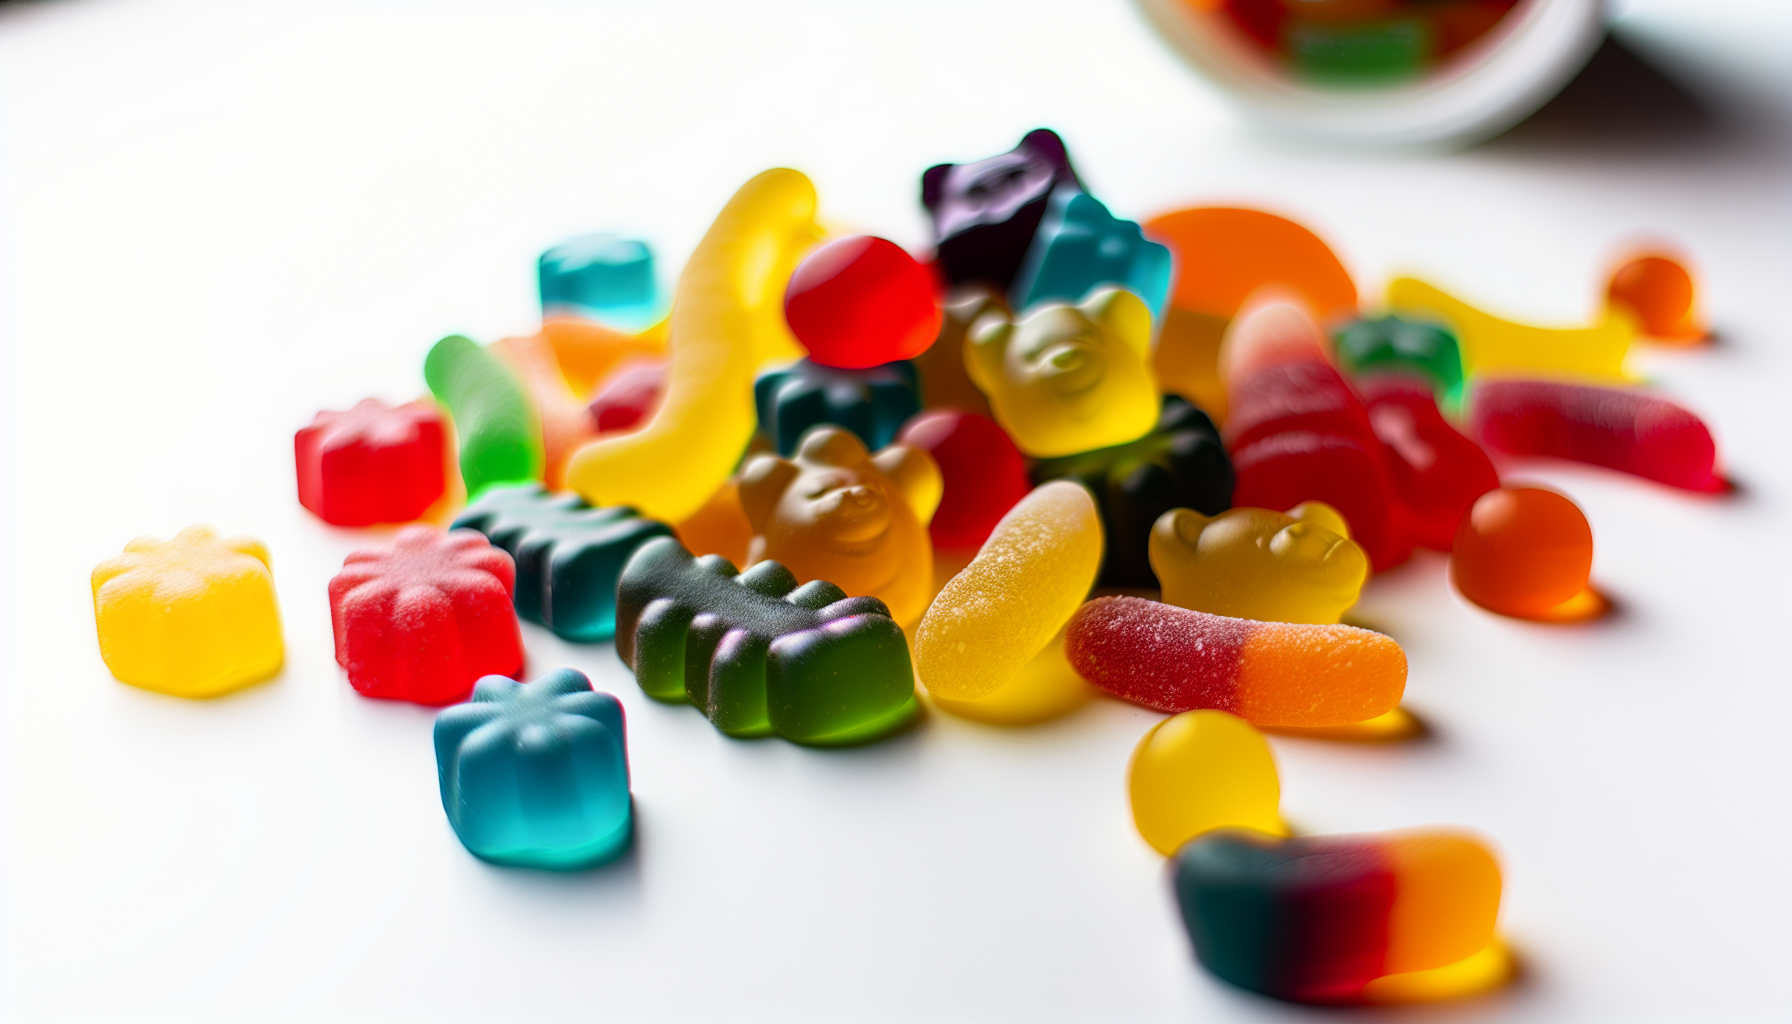 Assorted CBD gummies in vibrant colors and shapes